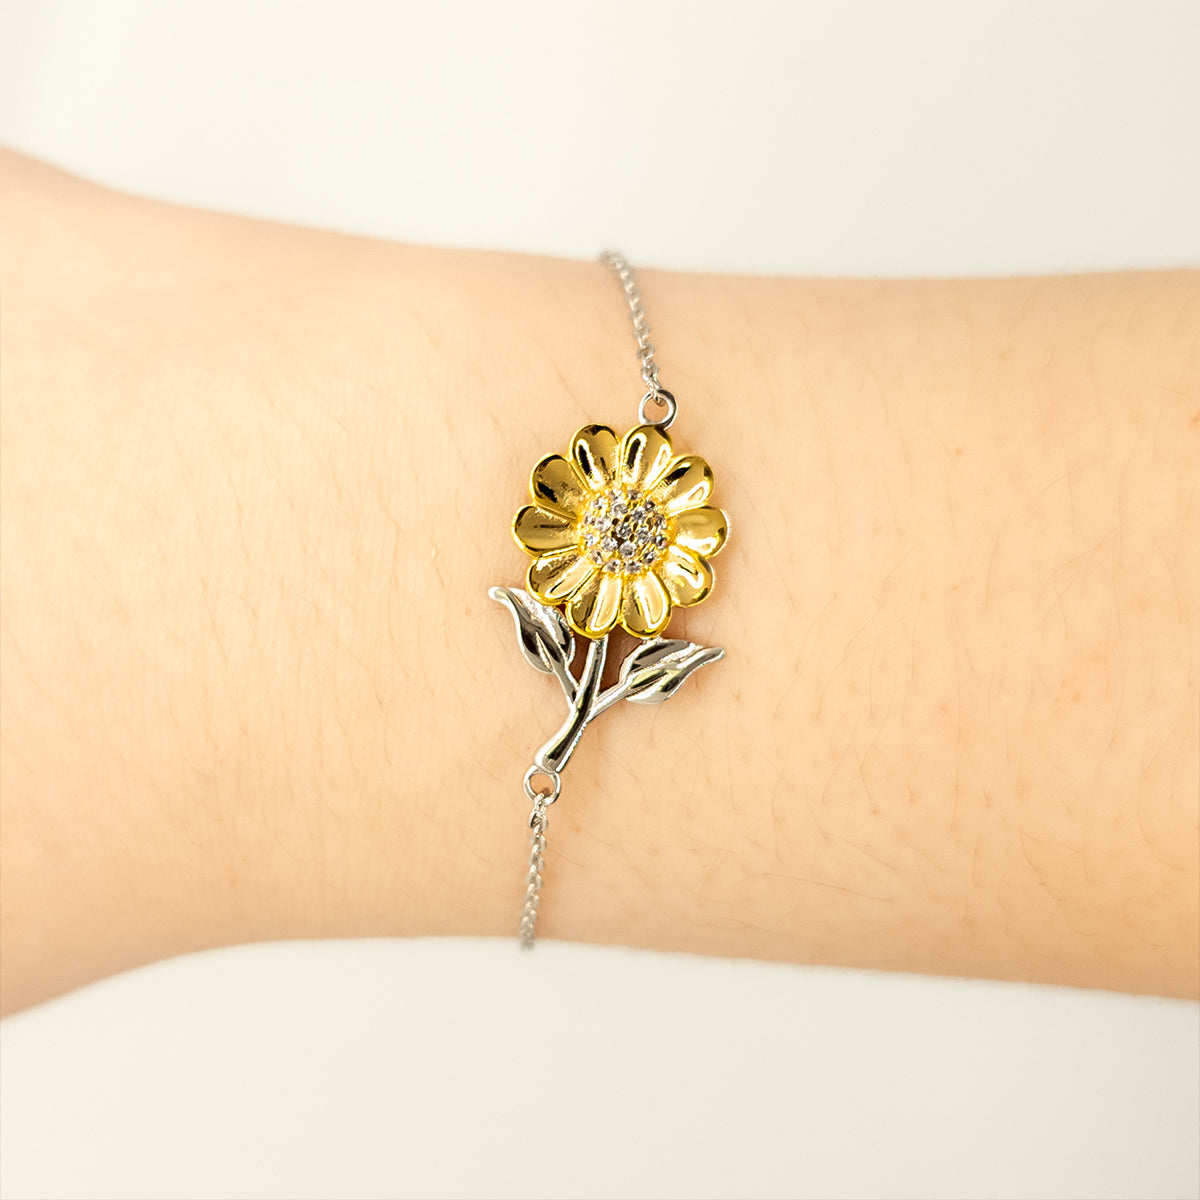 Sunflower Bracelet for Other Mom - Youll always hold a special place in my heart, inspiring hope and confidence for Mothers Day, Birthday, Christmas, and more